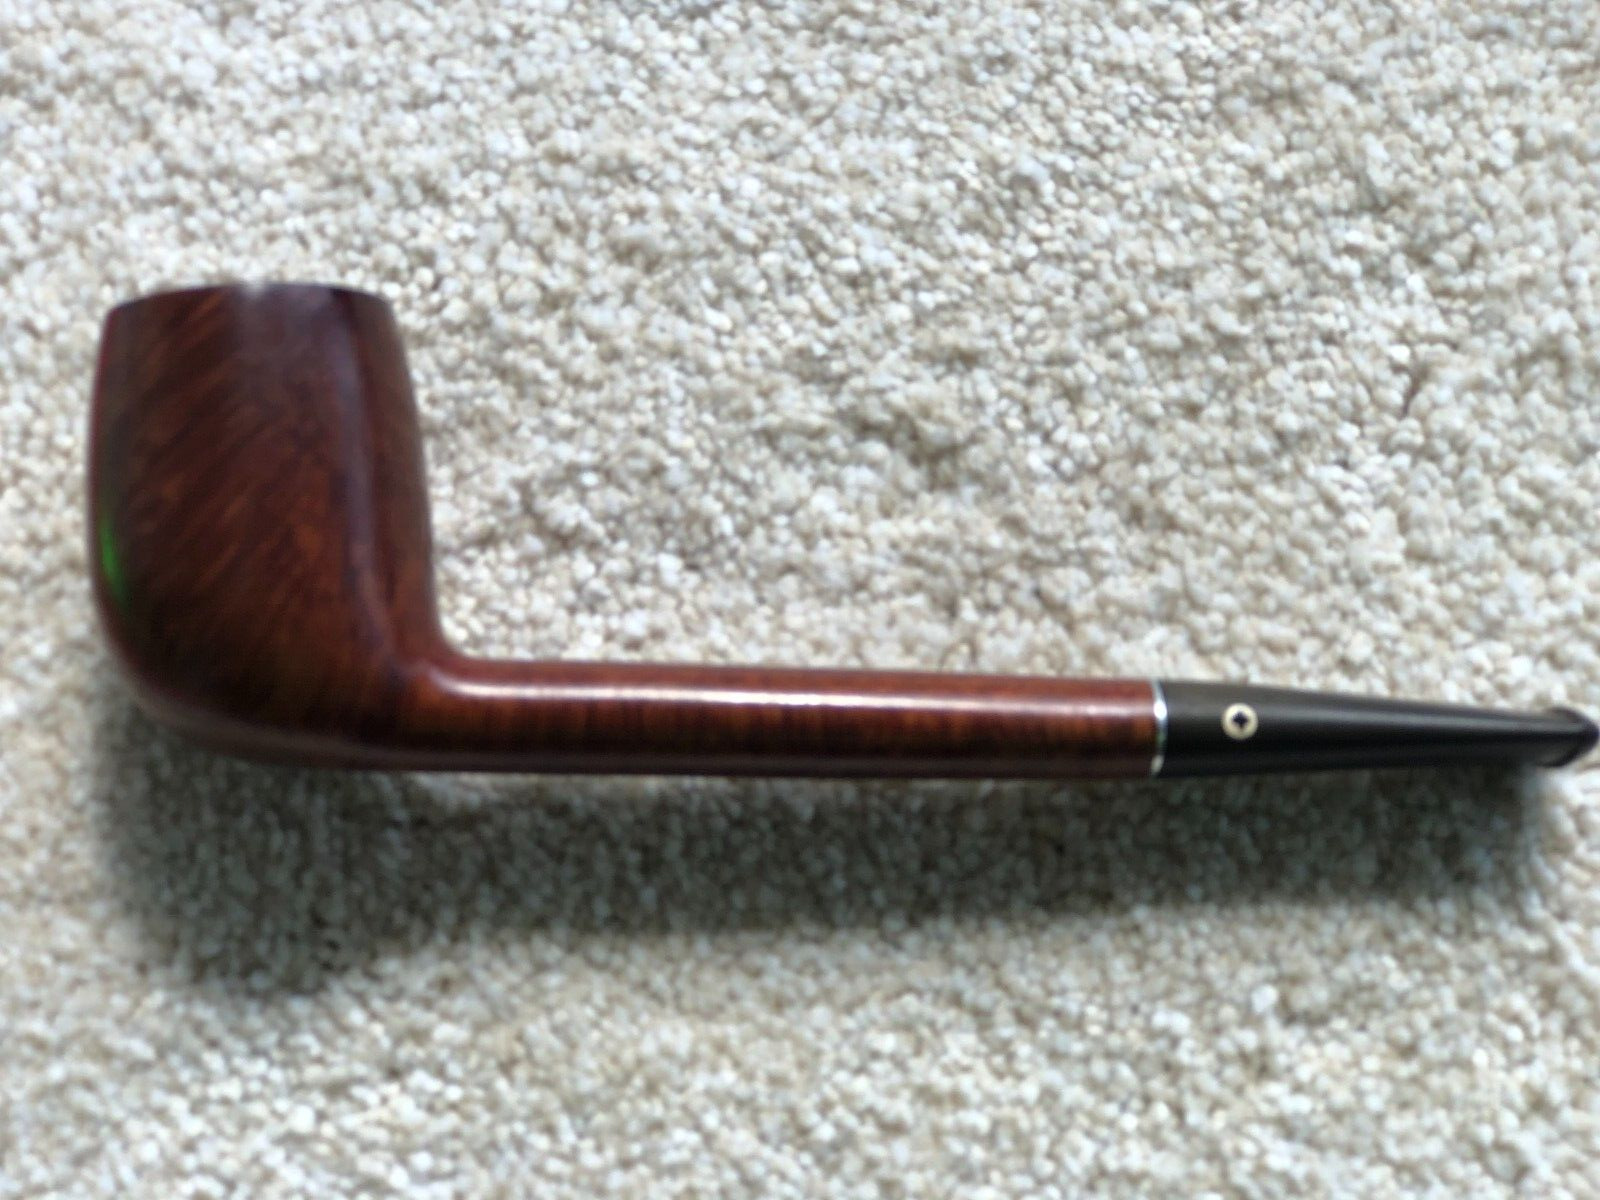 Kaywoodie Flame Grain Pipe #72 w/3 Hole Stinger Canadian Briar Pipe